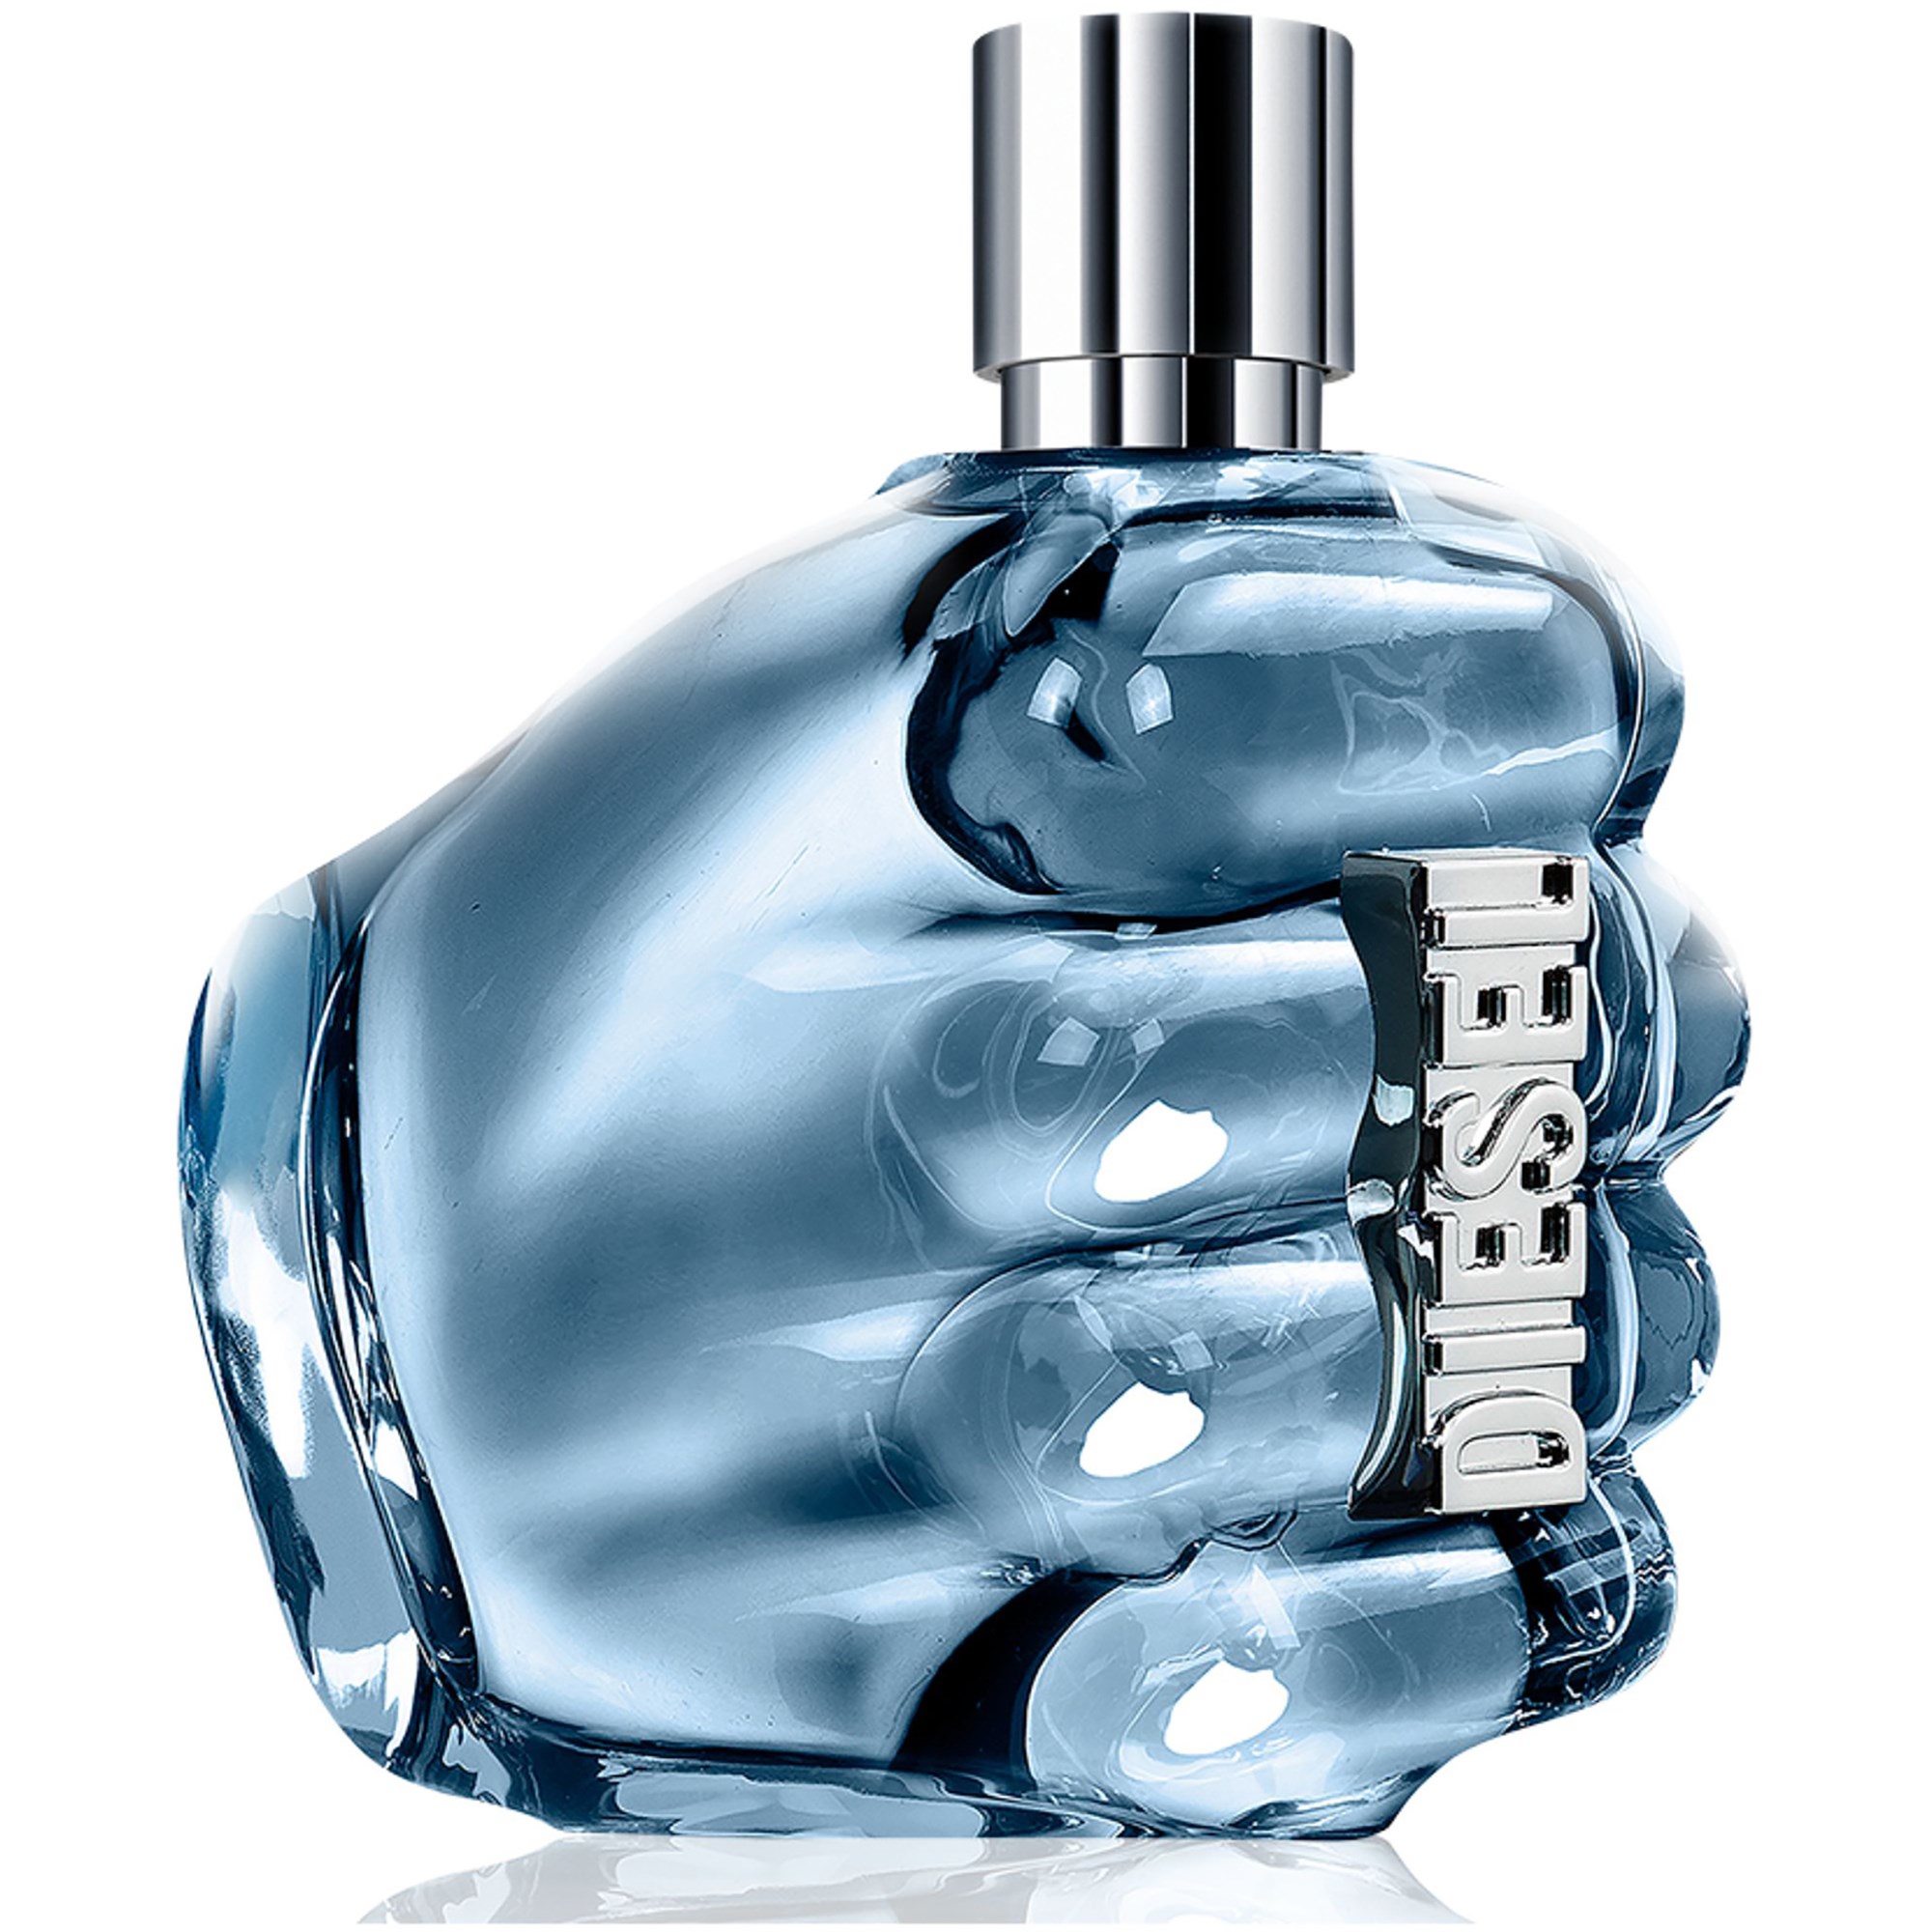 Diesel Only The Brave Edt 125ml